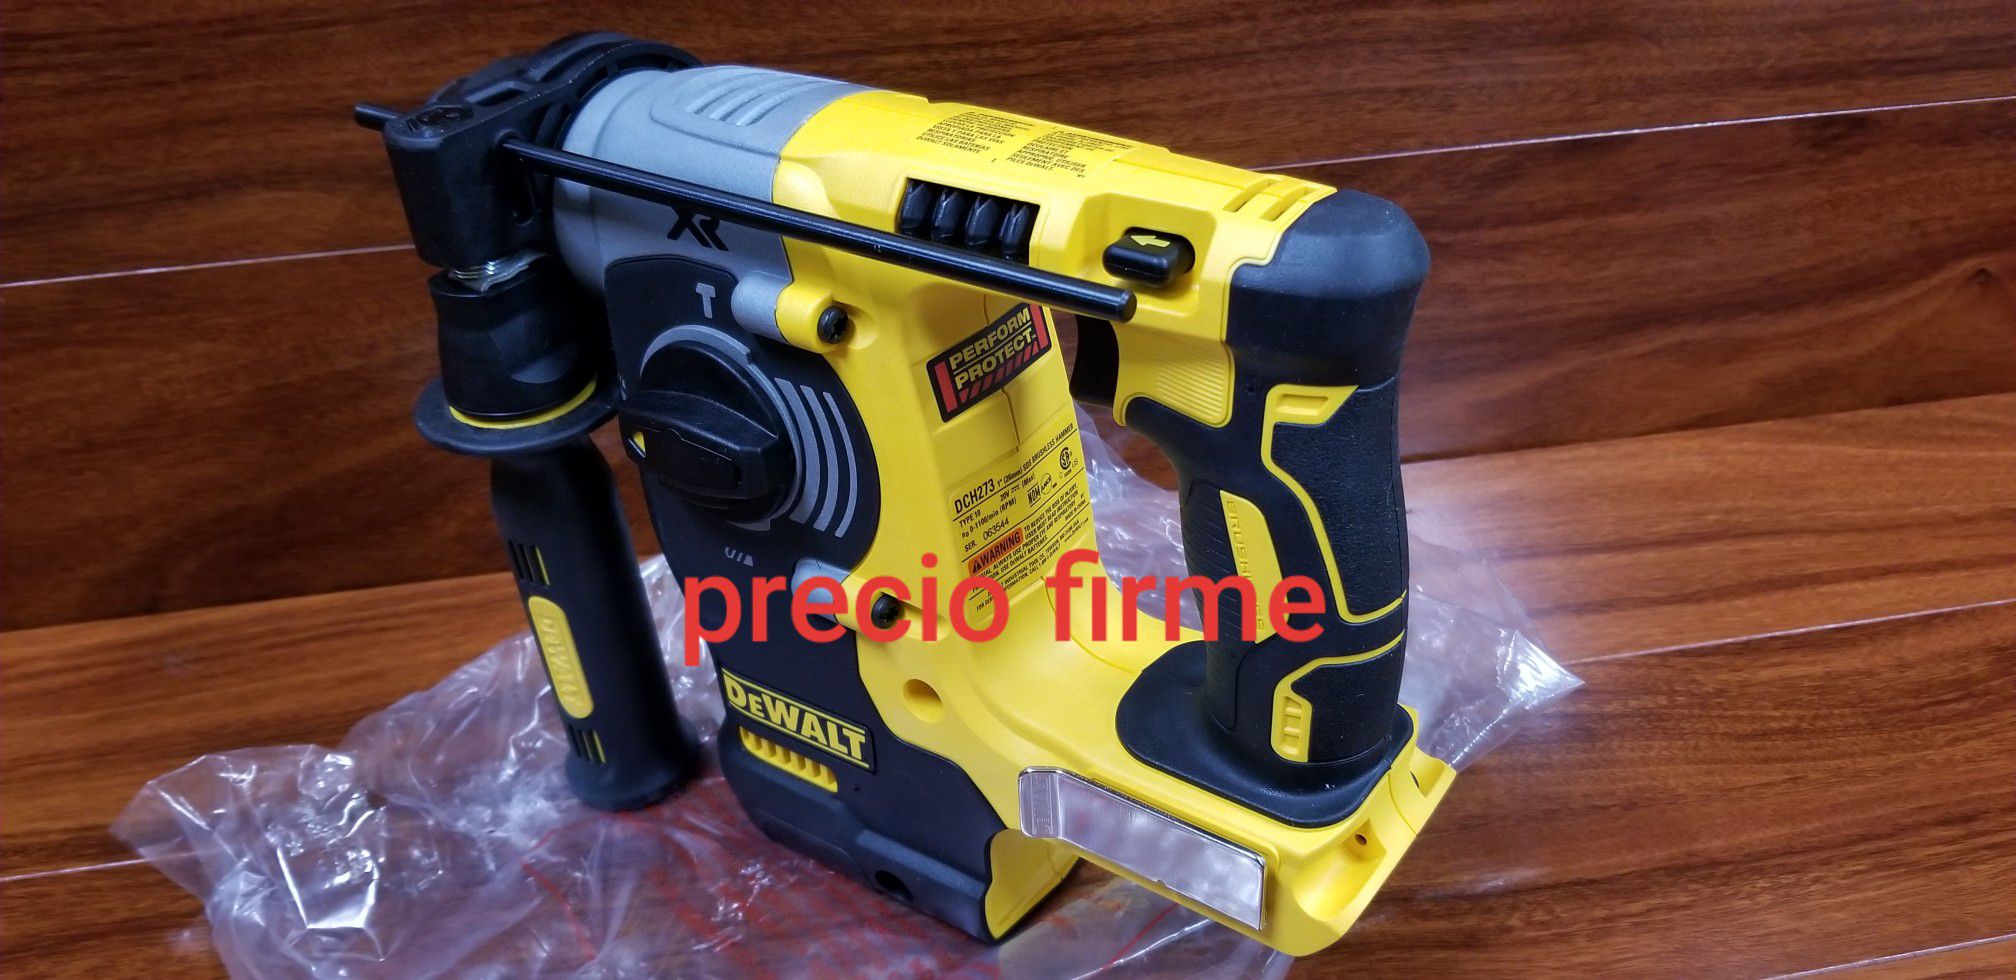 DeWalt DCH273B 1" 20V MAX XR Li-Ion Brushless SDS Plus Rotary Hammer Drill (Tool only battery not included)